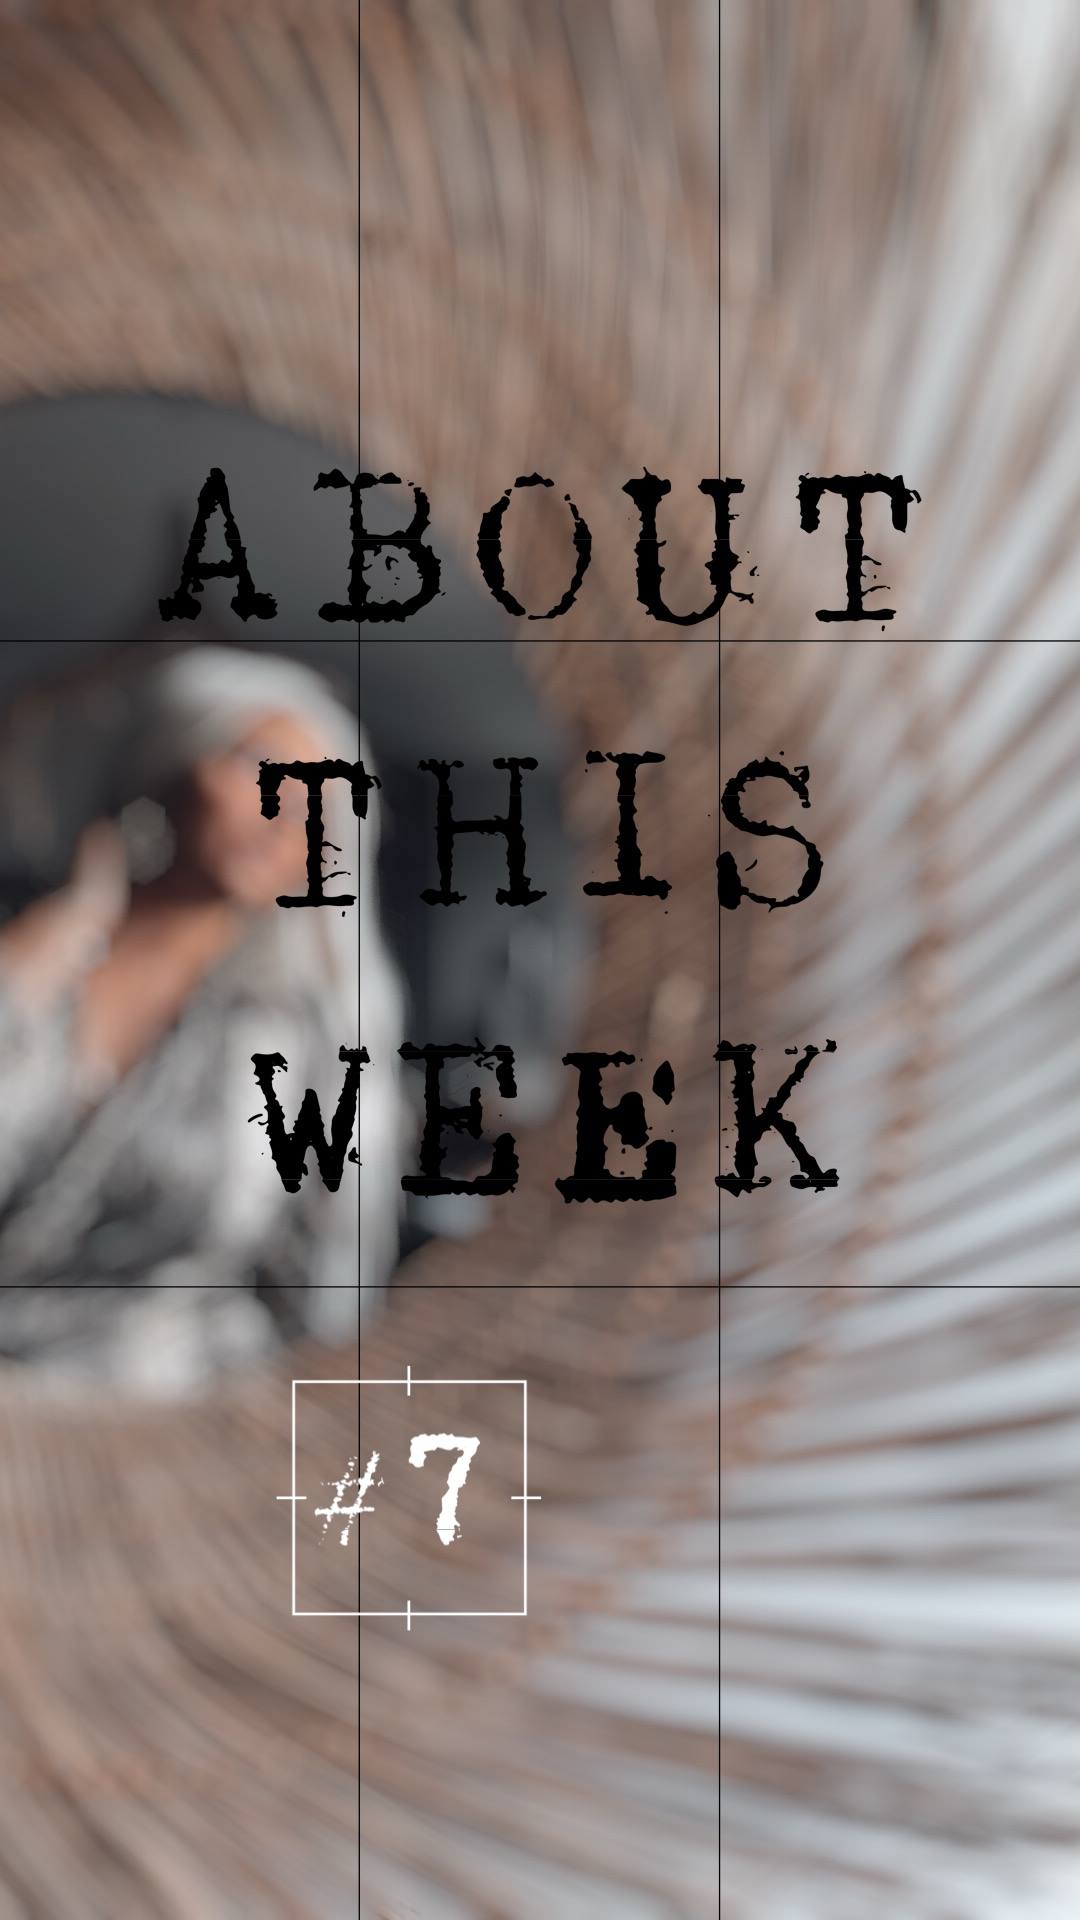 About this week #7